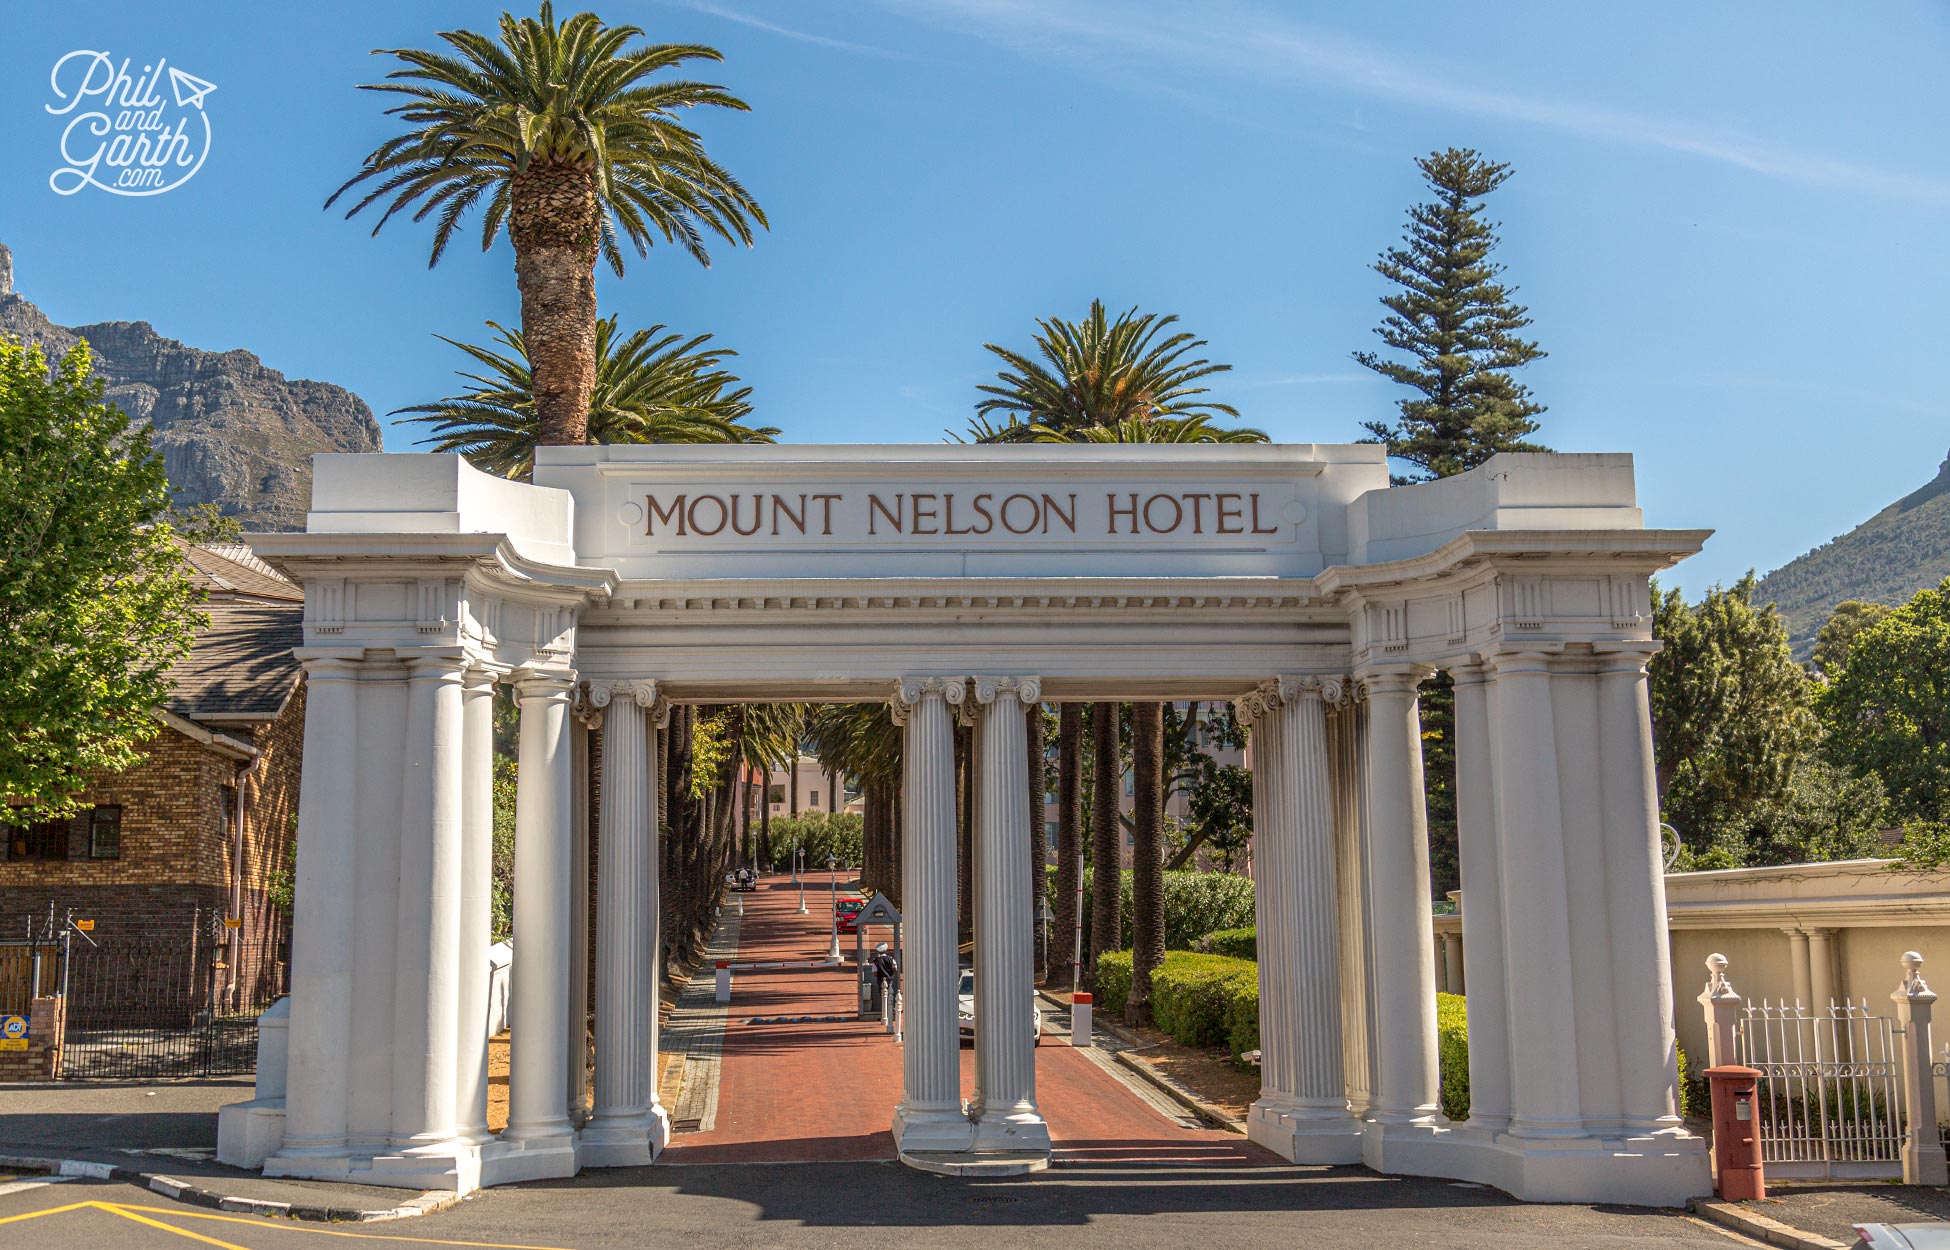 The grand entrance to The Mount Nelson Hotel